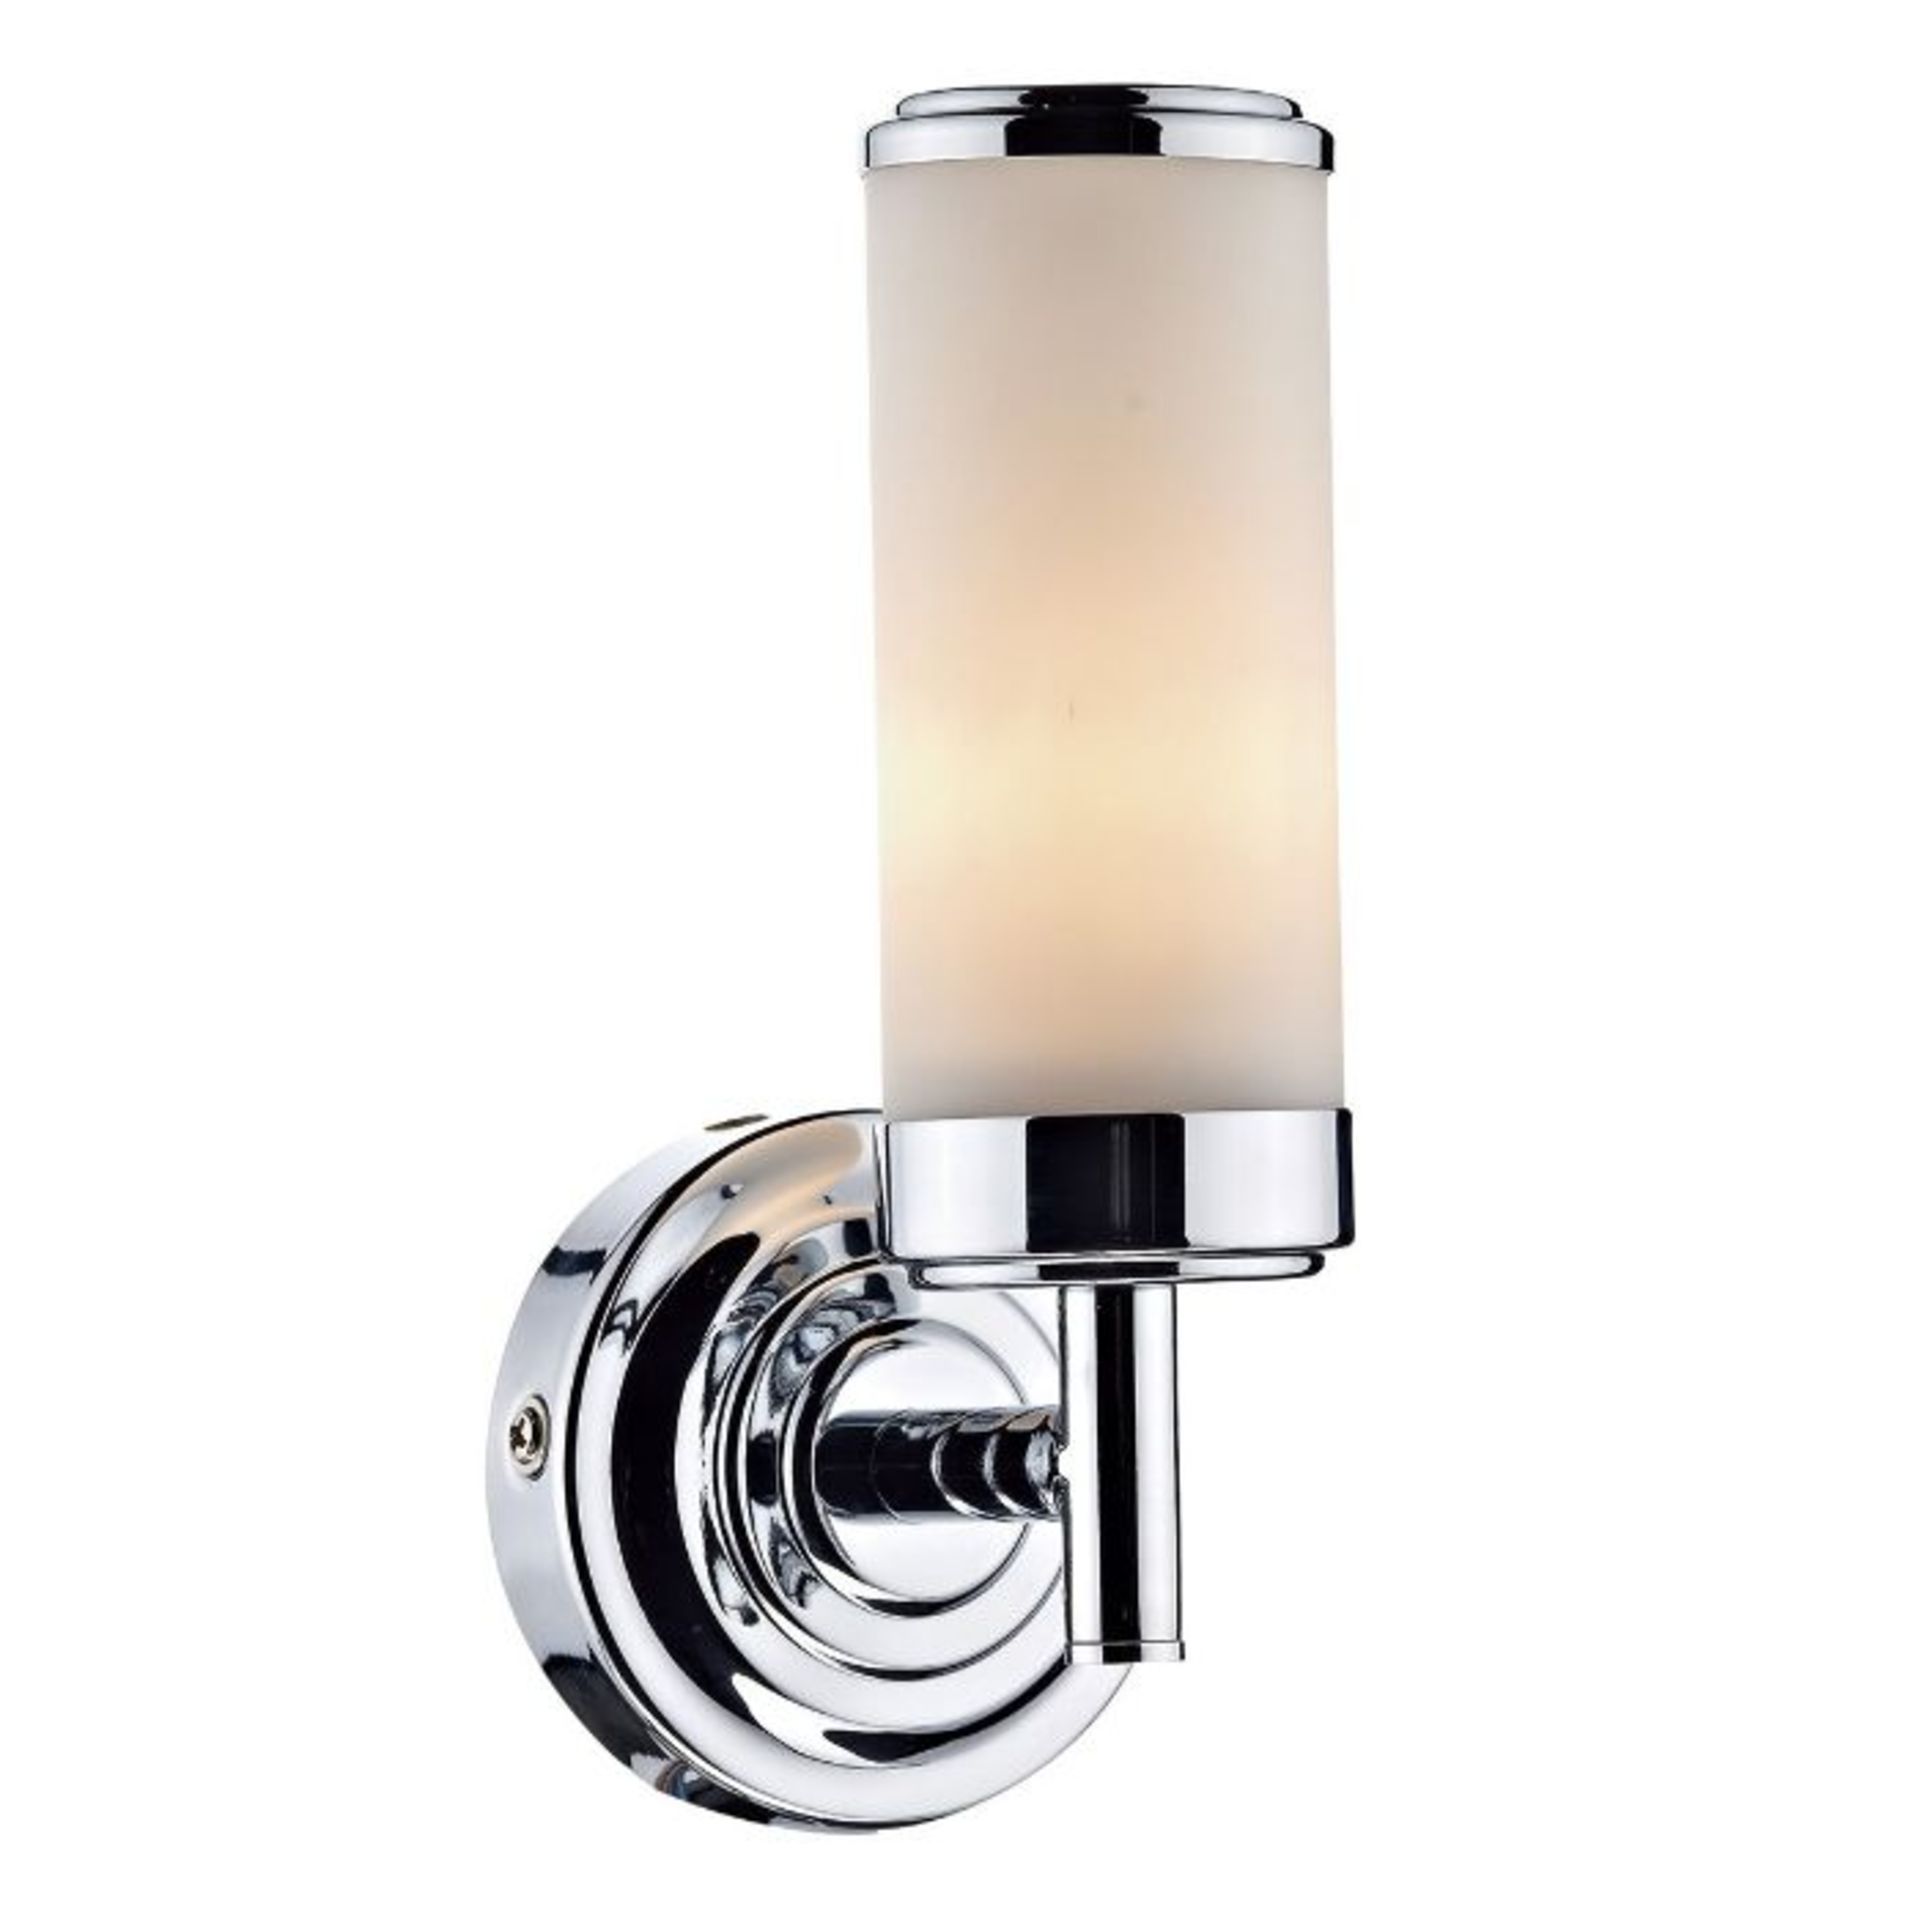 ClassicLiving, Bement 1-Light Armed Sconce (OPAL WHITE & POLISHED CHROME FINISH) - RRP £45.99 (